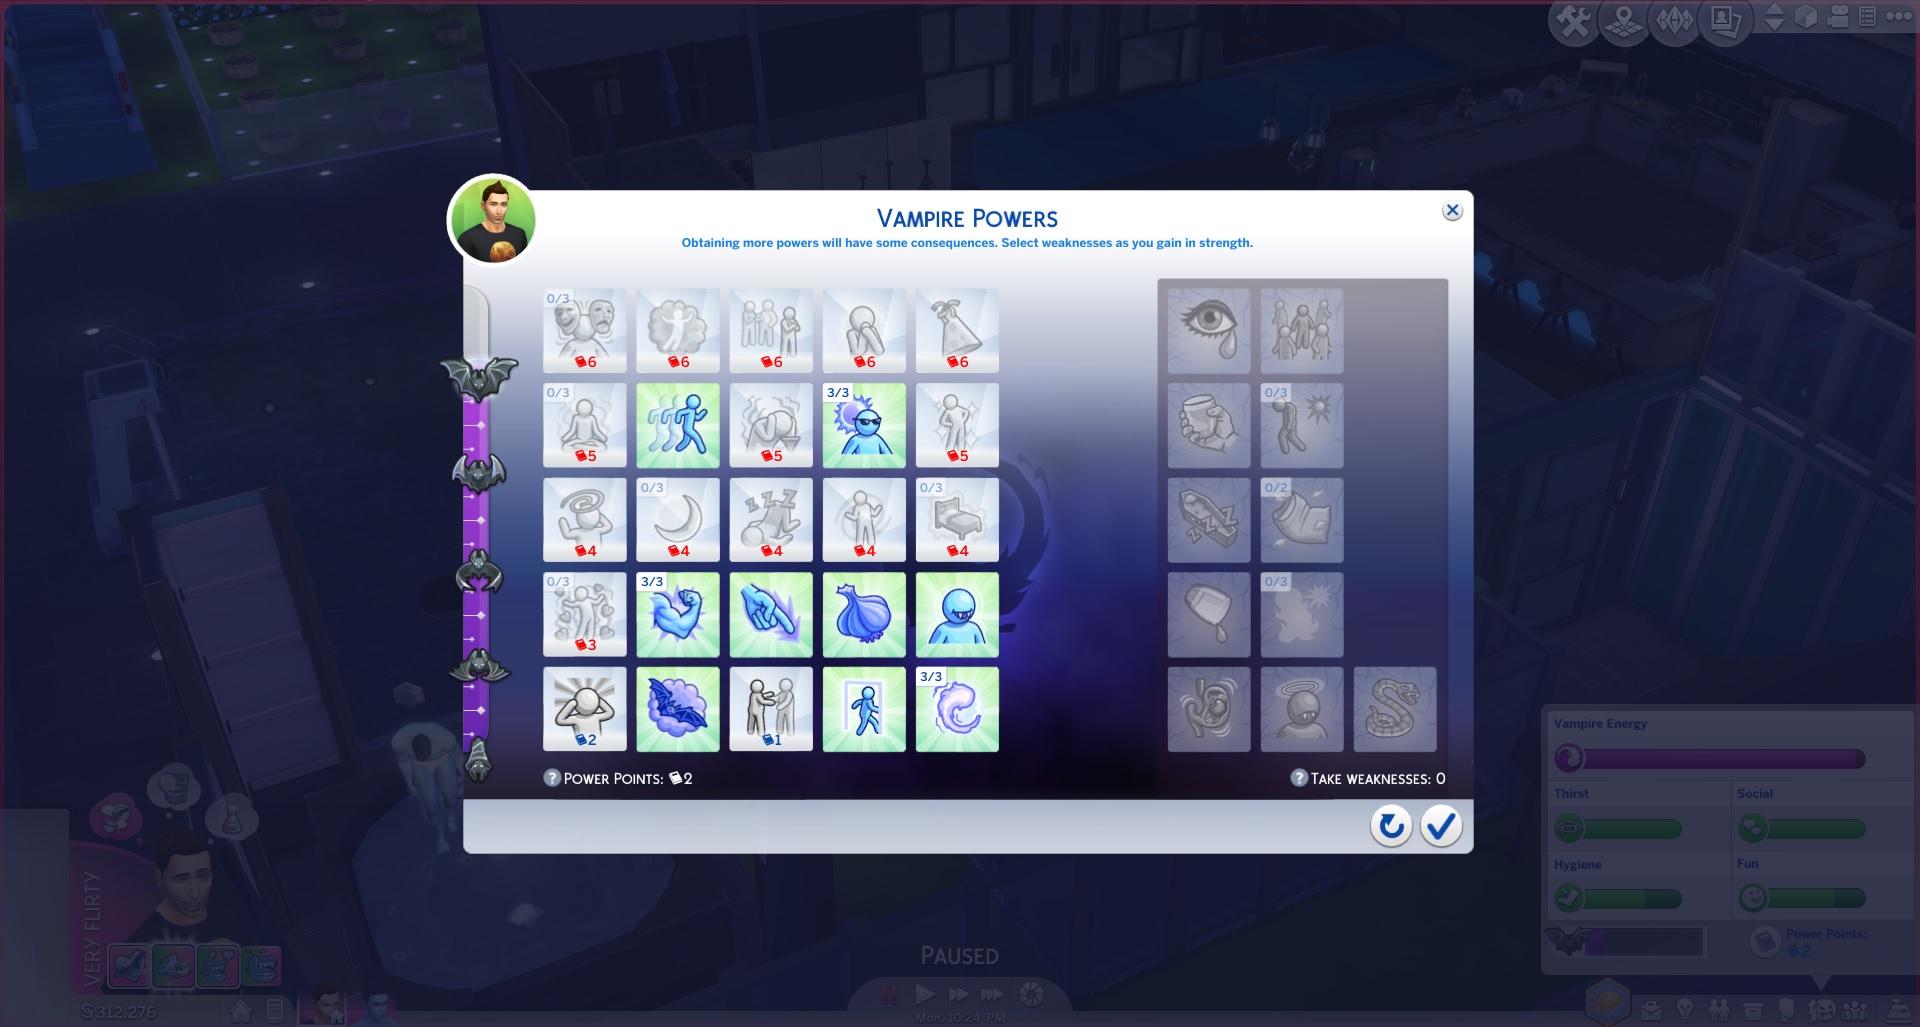 the sims 2 super collection mods folder